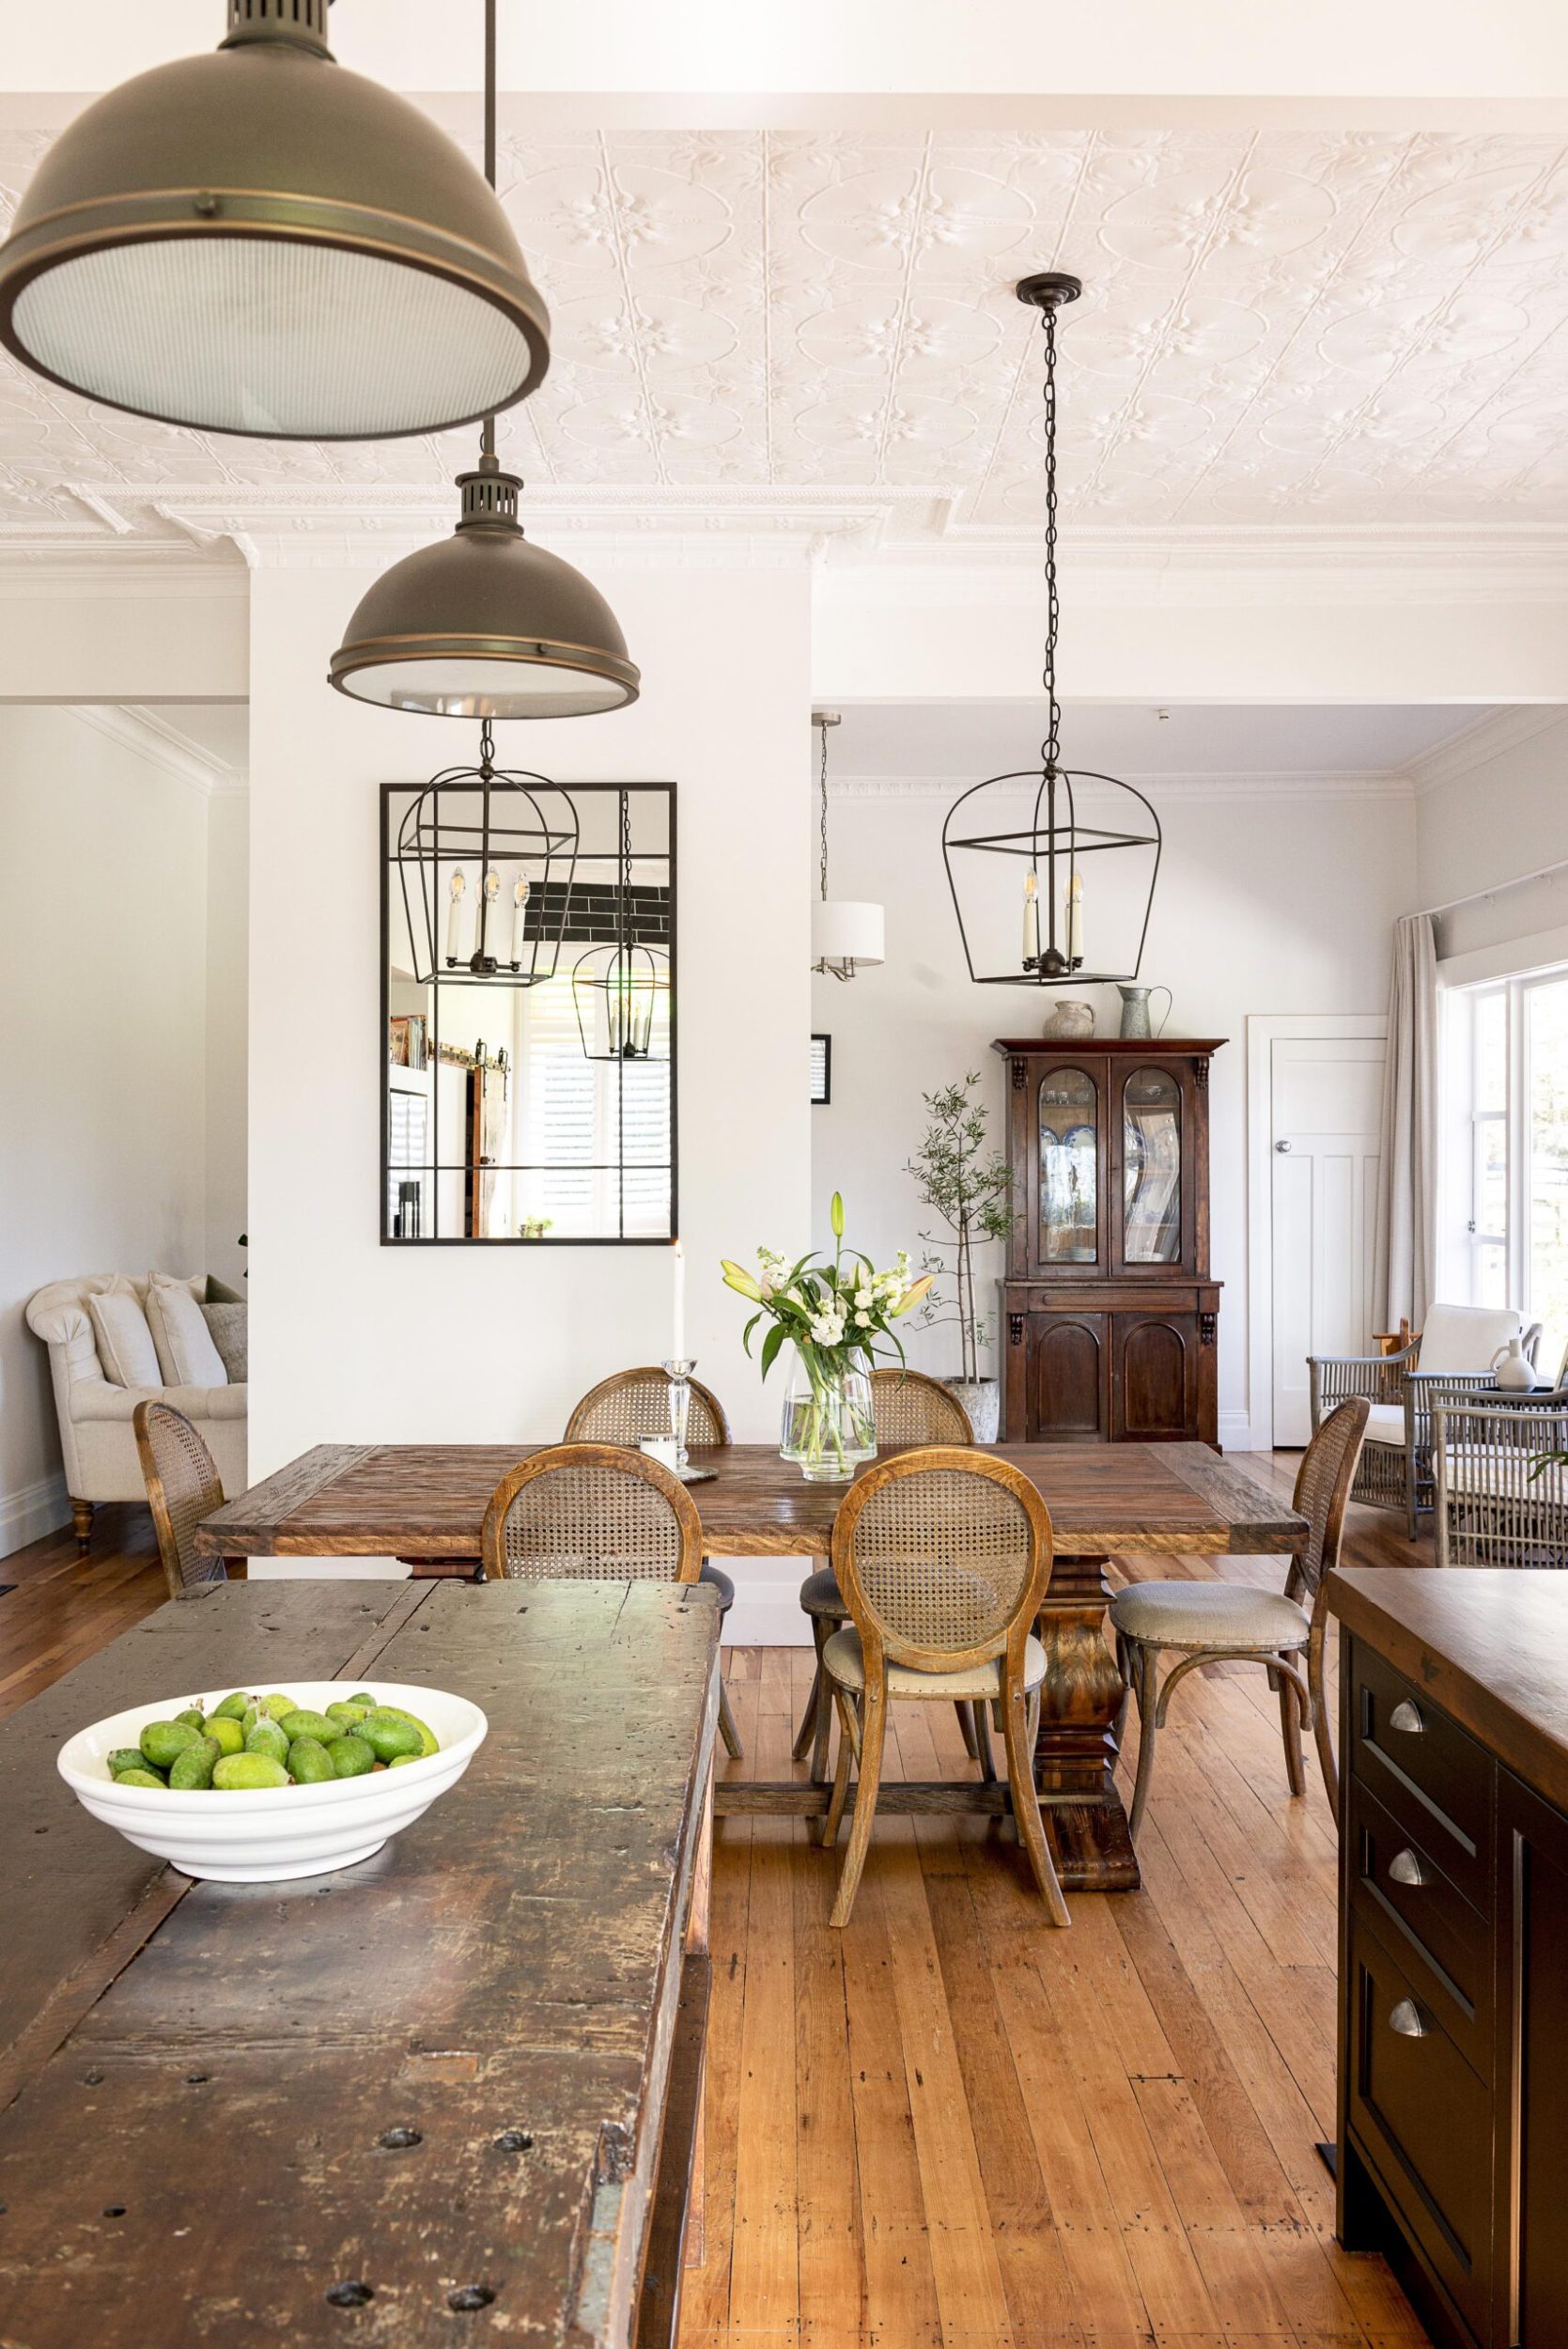 A country farmhouse kitchen with vintage tables, white walls and polished wood floors